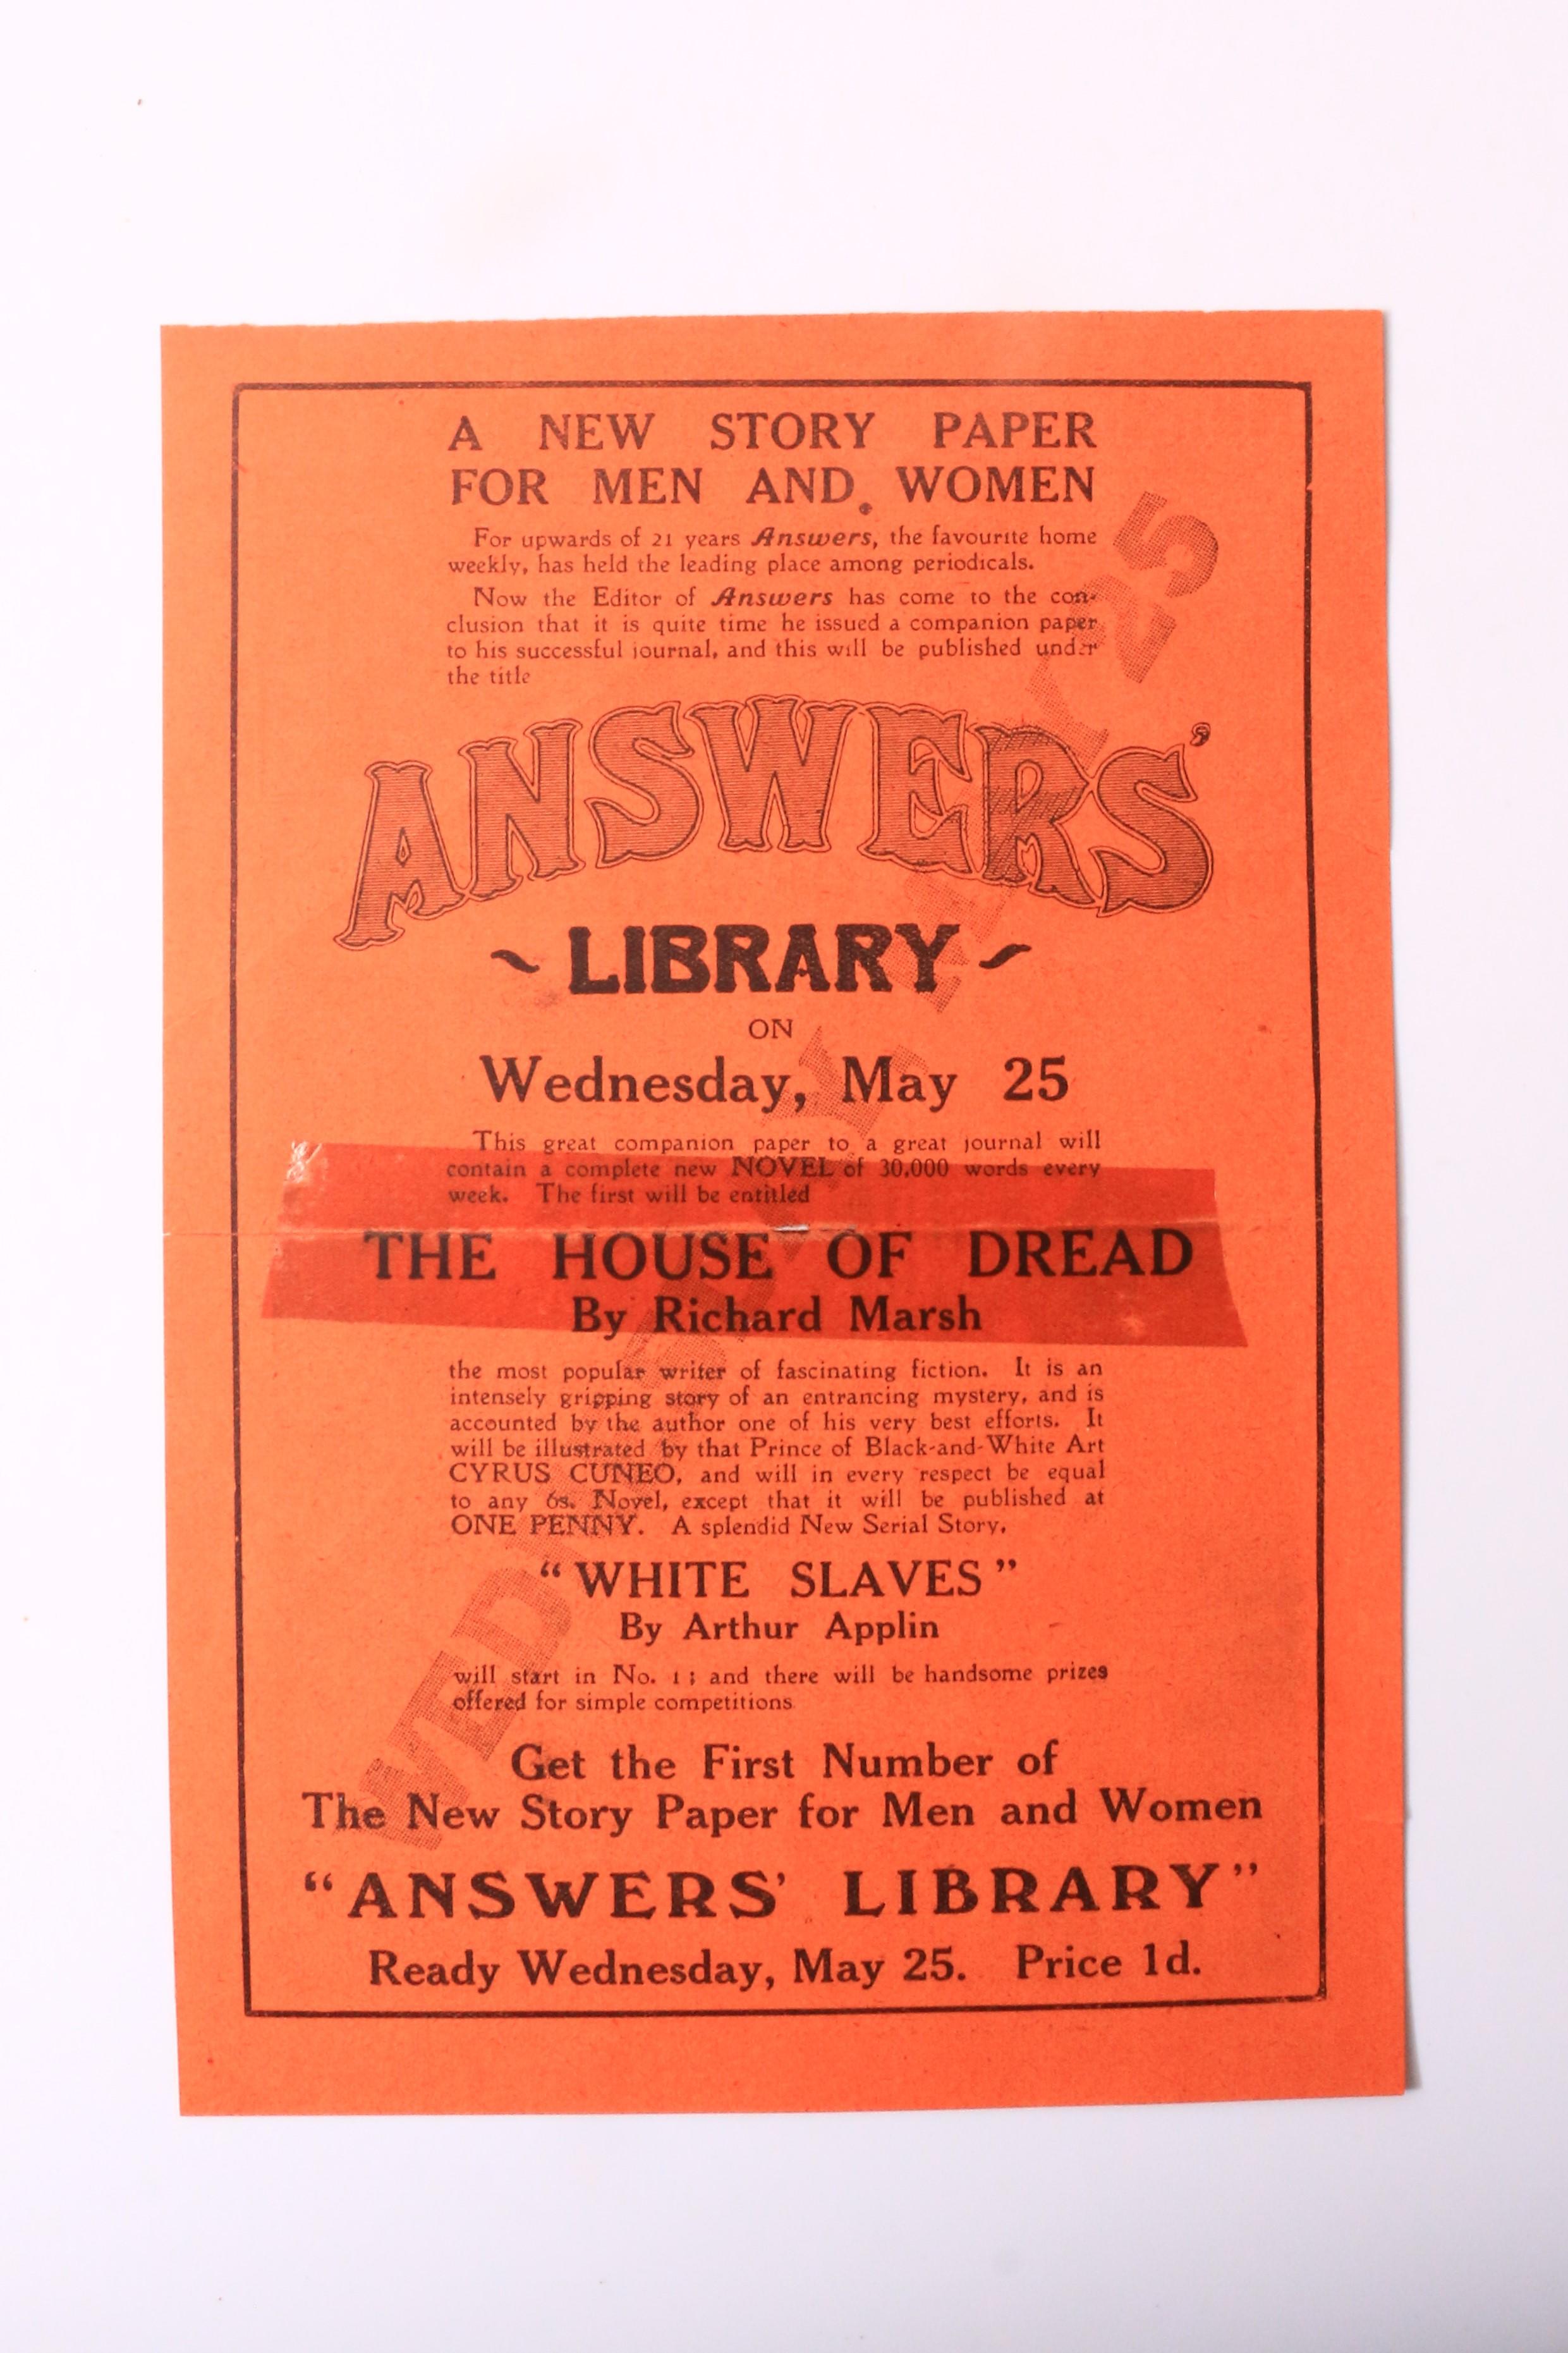 Richard Marsh - The House of Dread Flyer[?] - Answers Library, n.d., .